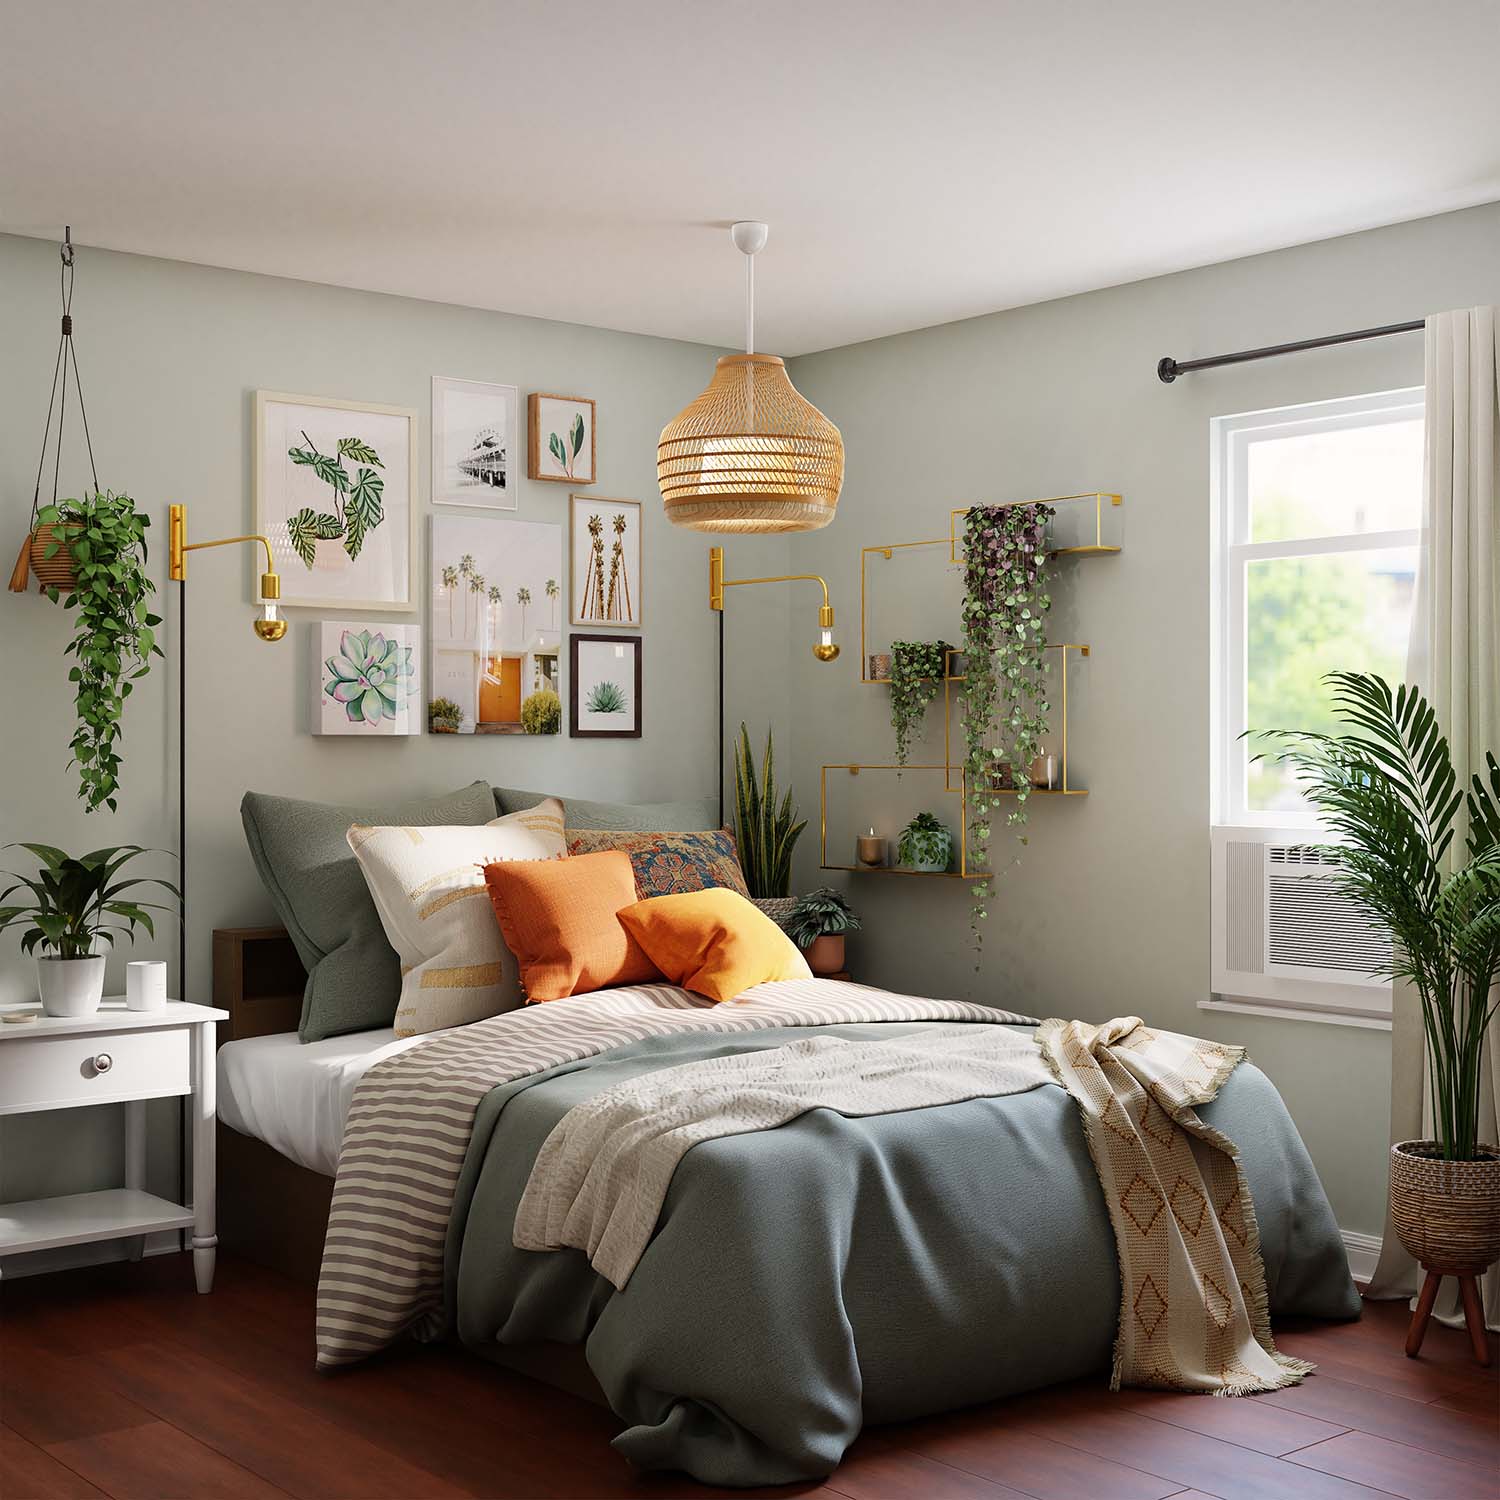 ROOM DECOR IDEAS: Want to spruce up your room?  Here are helpful tips for home decorating